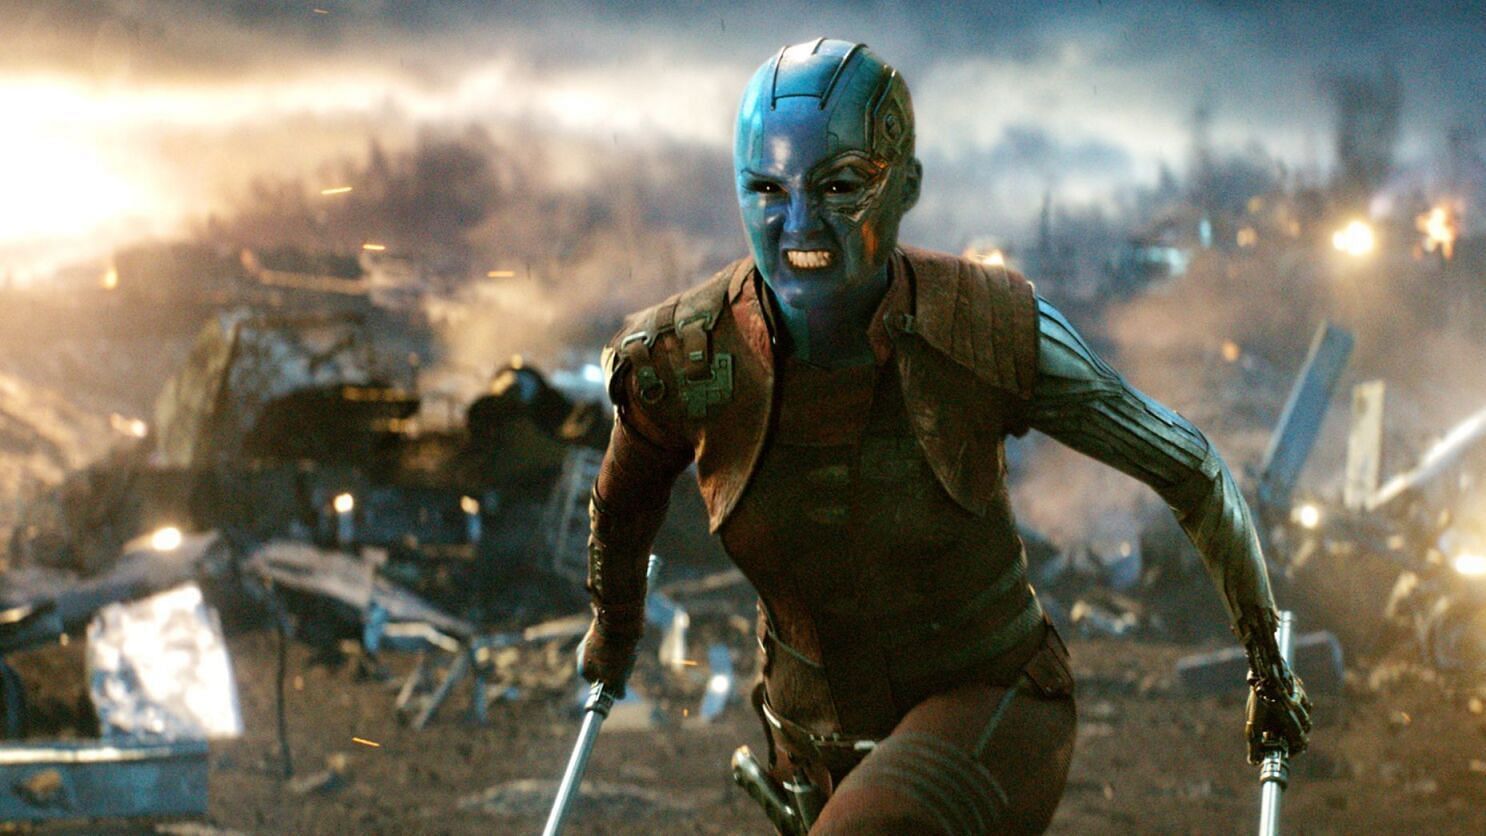 Nebula - The adopted daughter with a vengeance (Image via Marvel Studios)